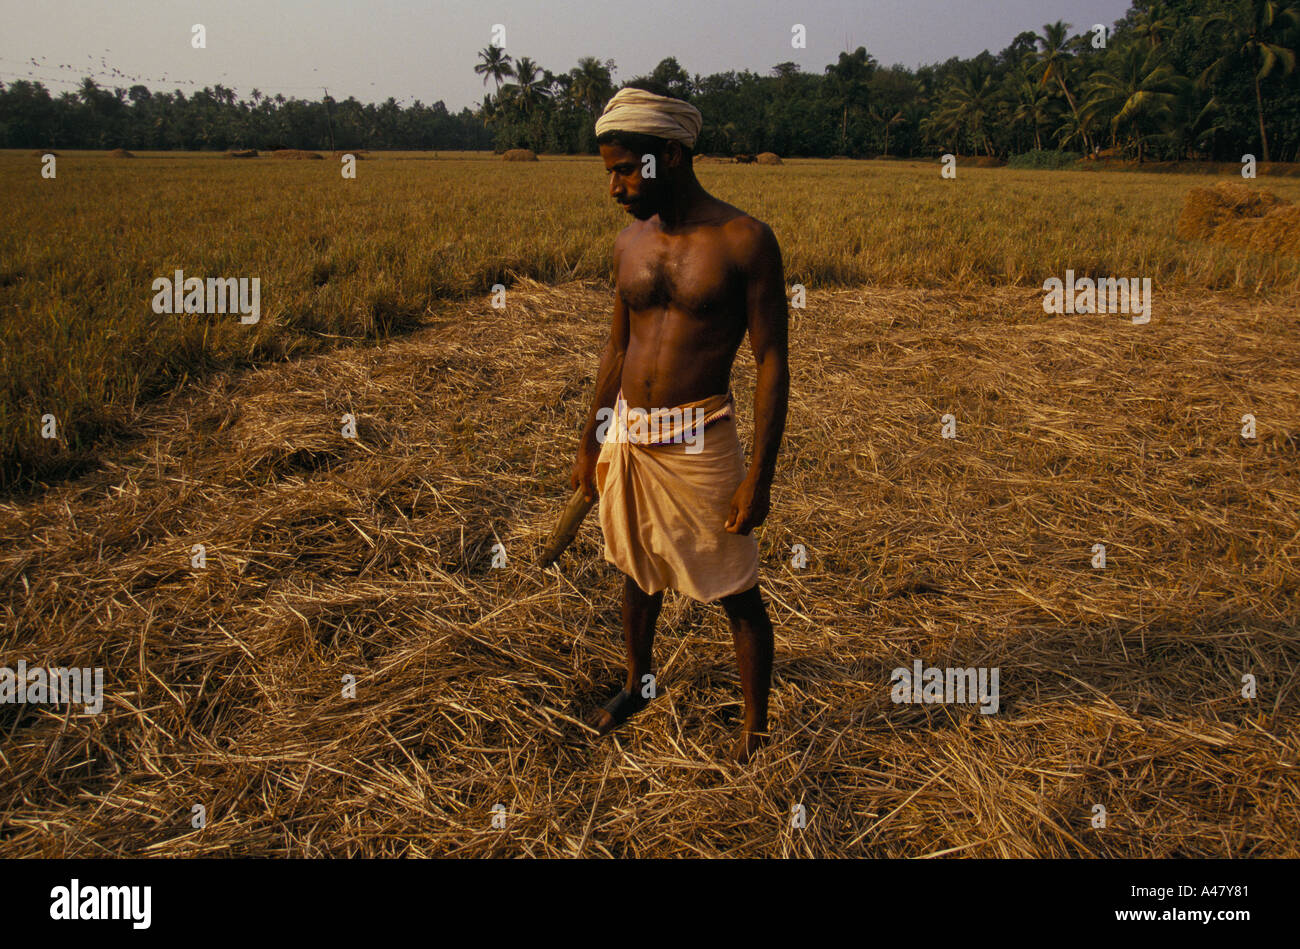 A dalit (lowest caste) labourer works in a field in Aymenam, Kerala, India Stock Photo